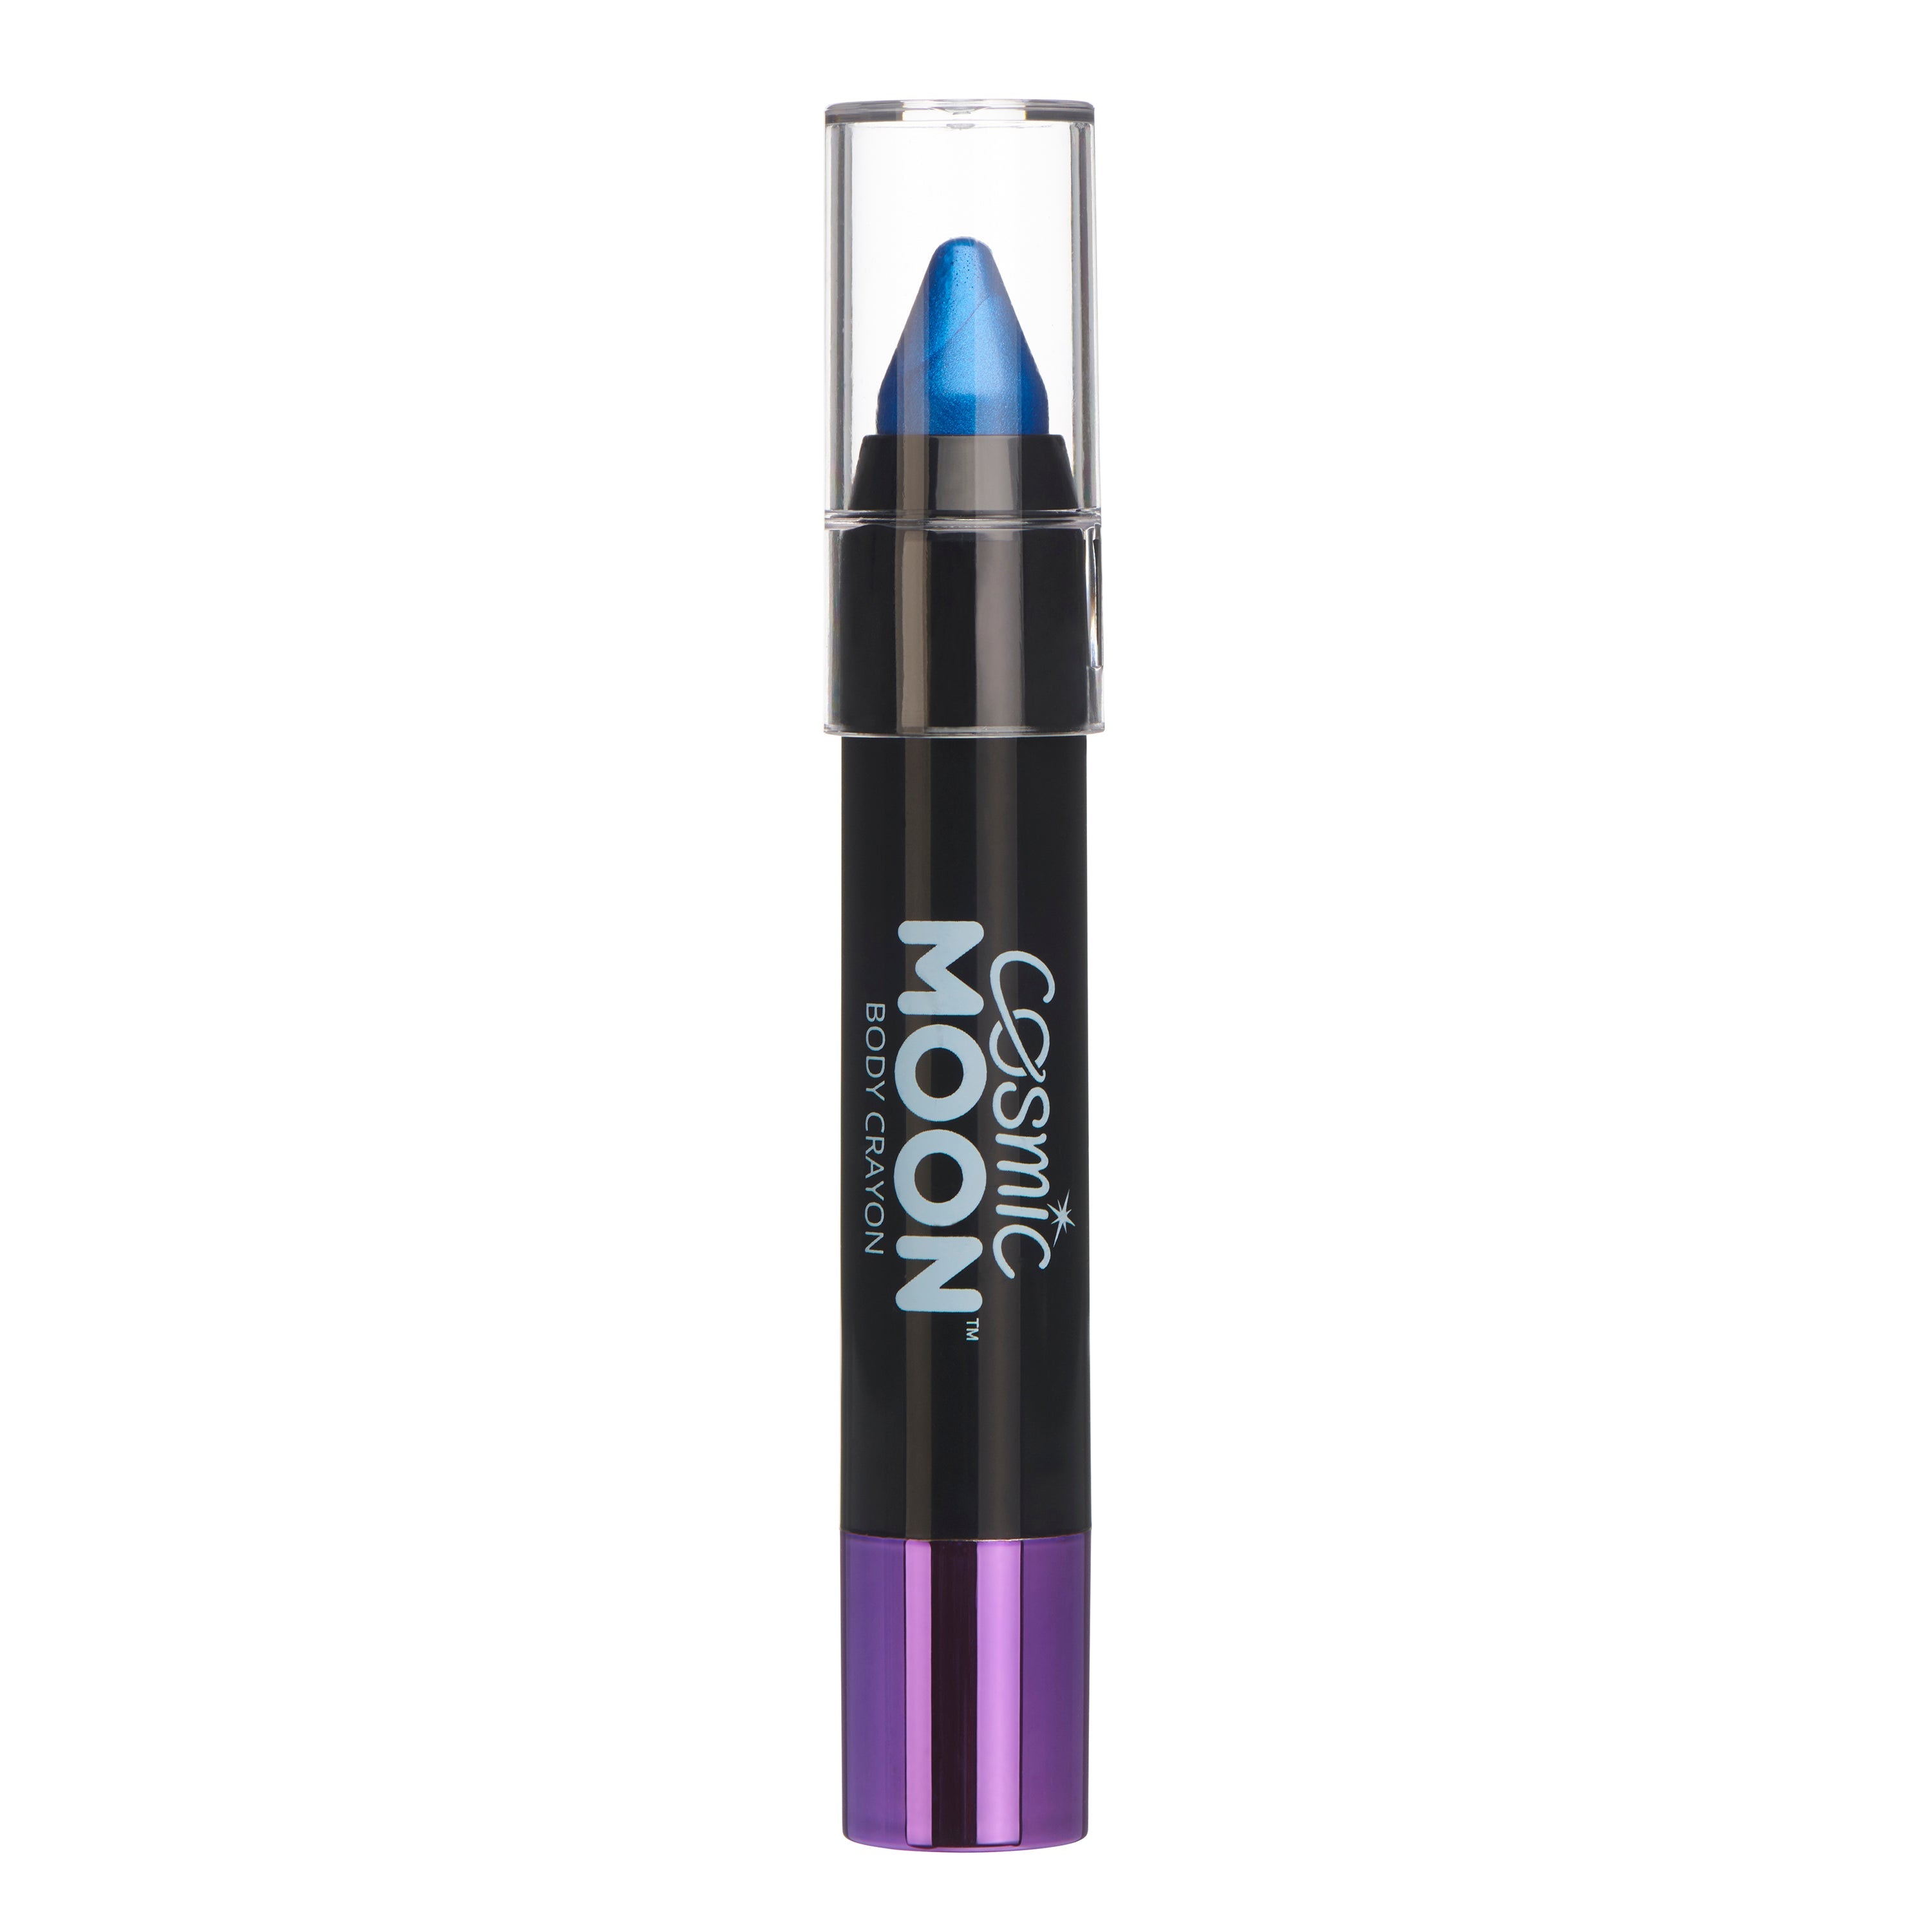 Blue - Metallic Face & Body Crayon, 3.5g. Cosmetically certified, FDA & Health Canada compliant and cruelty free.